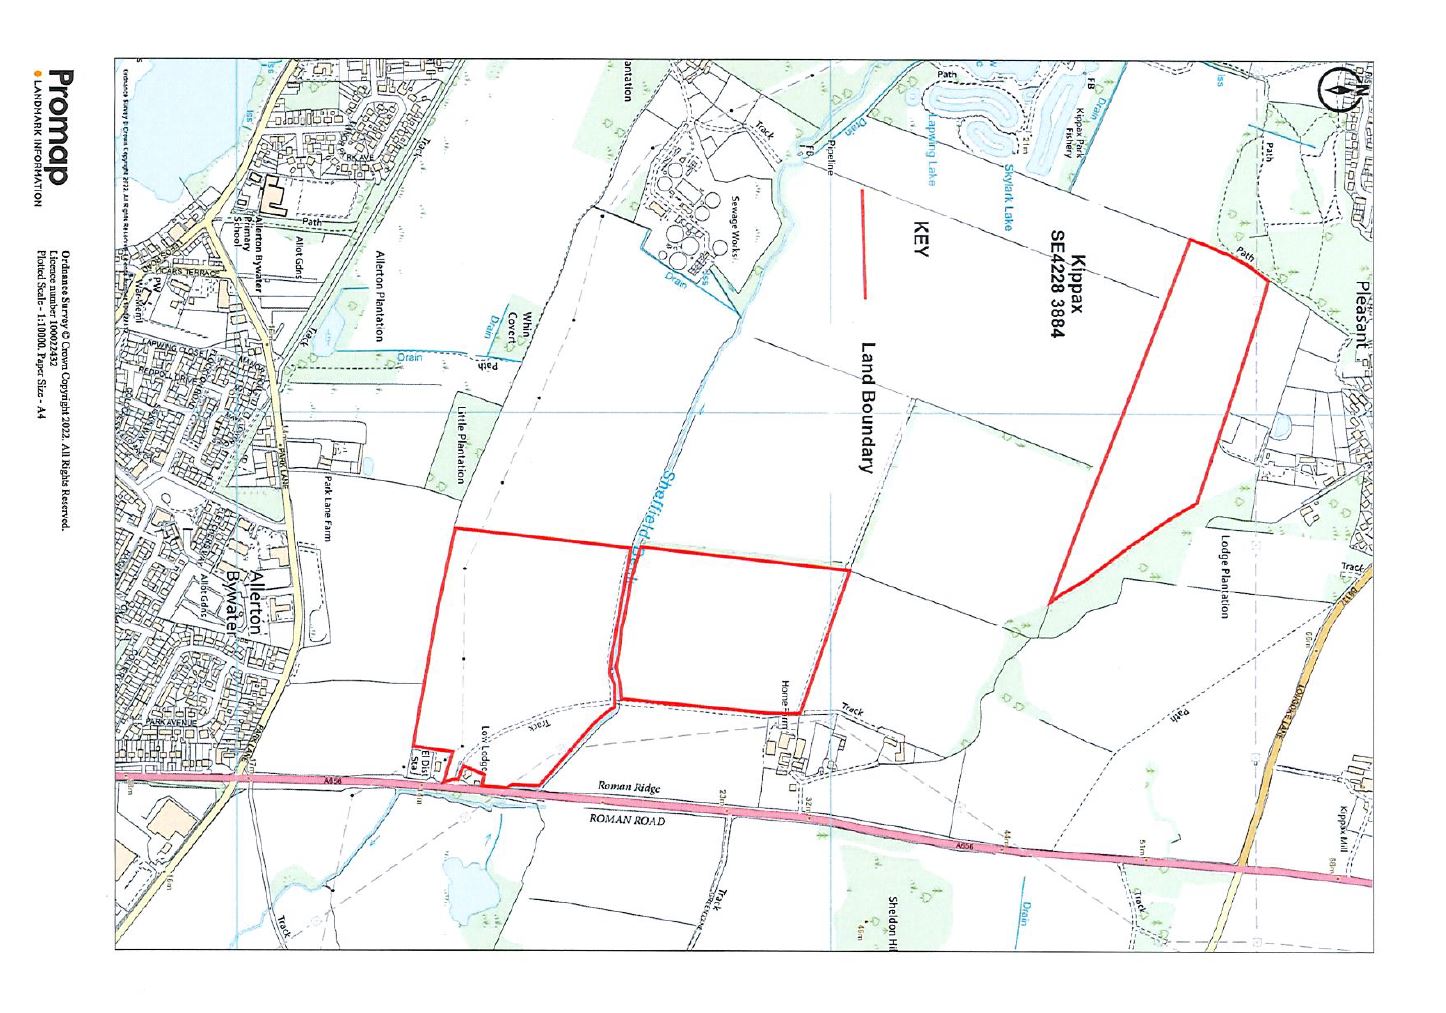 Map showing the designated public rights of way on land southeast of Kippax and west of Ledston